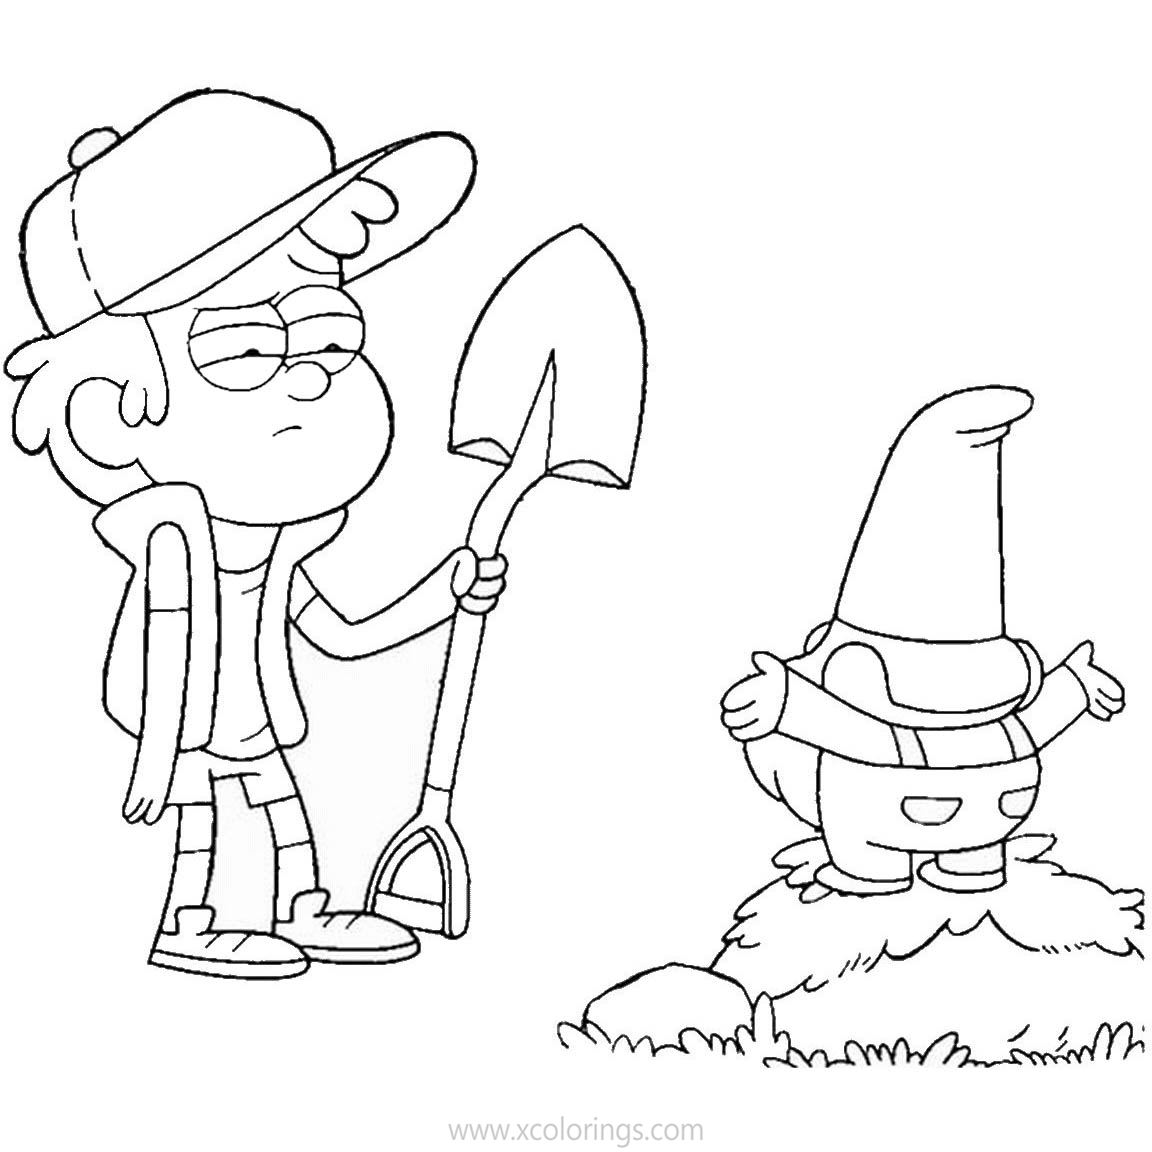 Free Gravity Falls Coloring Pages Dipper and Gnome printable